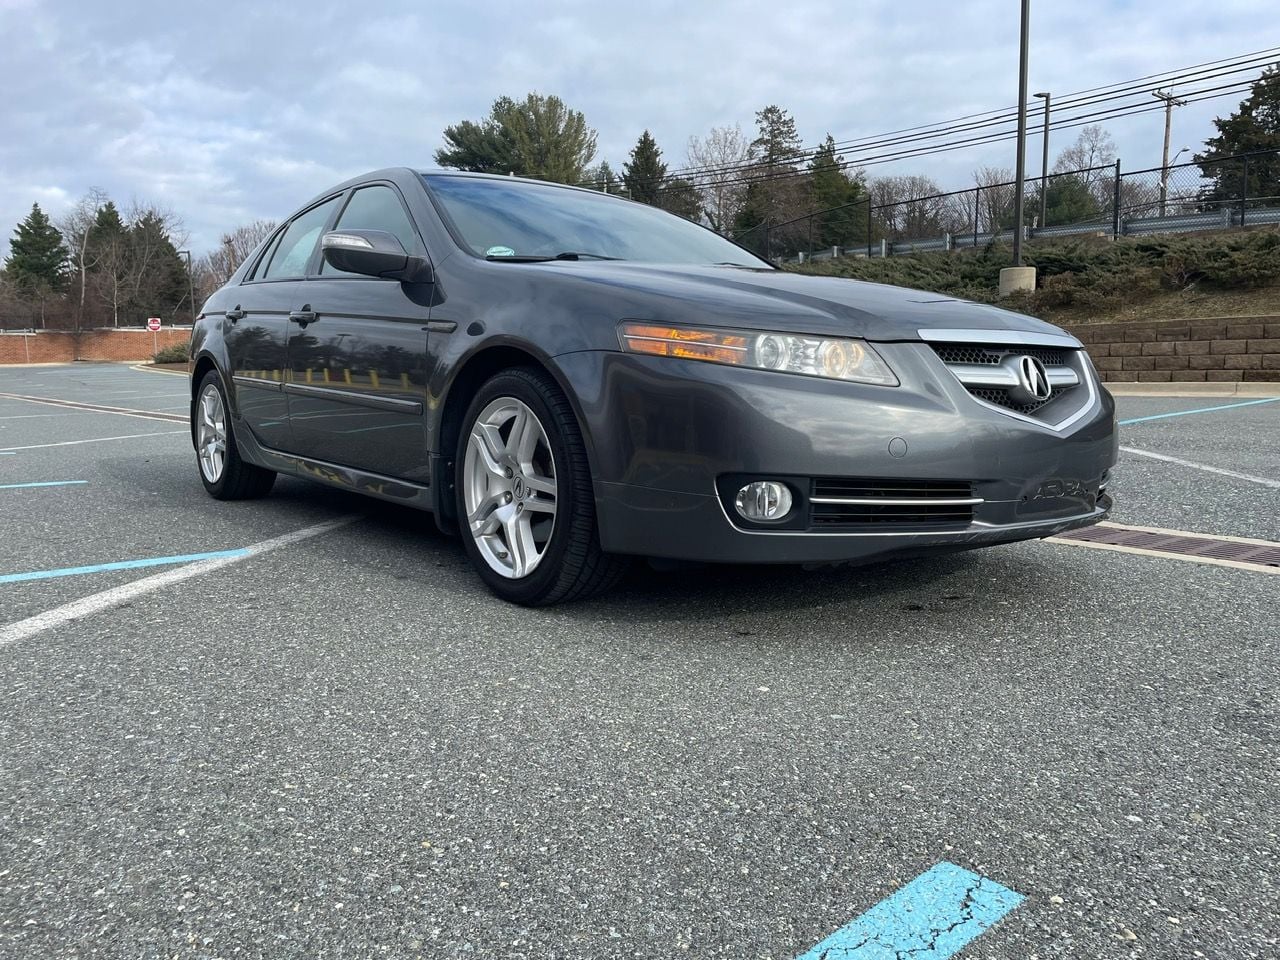 2008 Acura TL - FS: 2008 ACURA TL // 67k MILES // 2WD BASE - Used - VIN 19UUA66208A005149 - 67,060 Miles - 6 cyl - 2WD - Automatic - Sedan - Gray - Rockville, MD 20850, United States